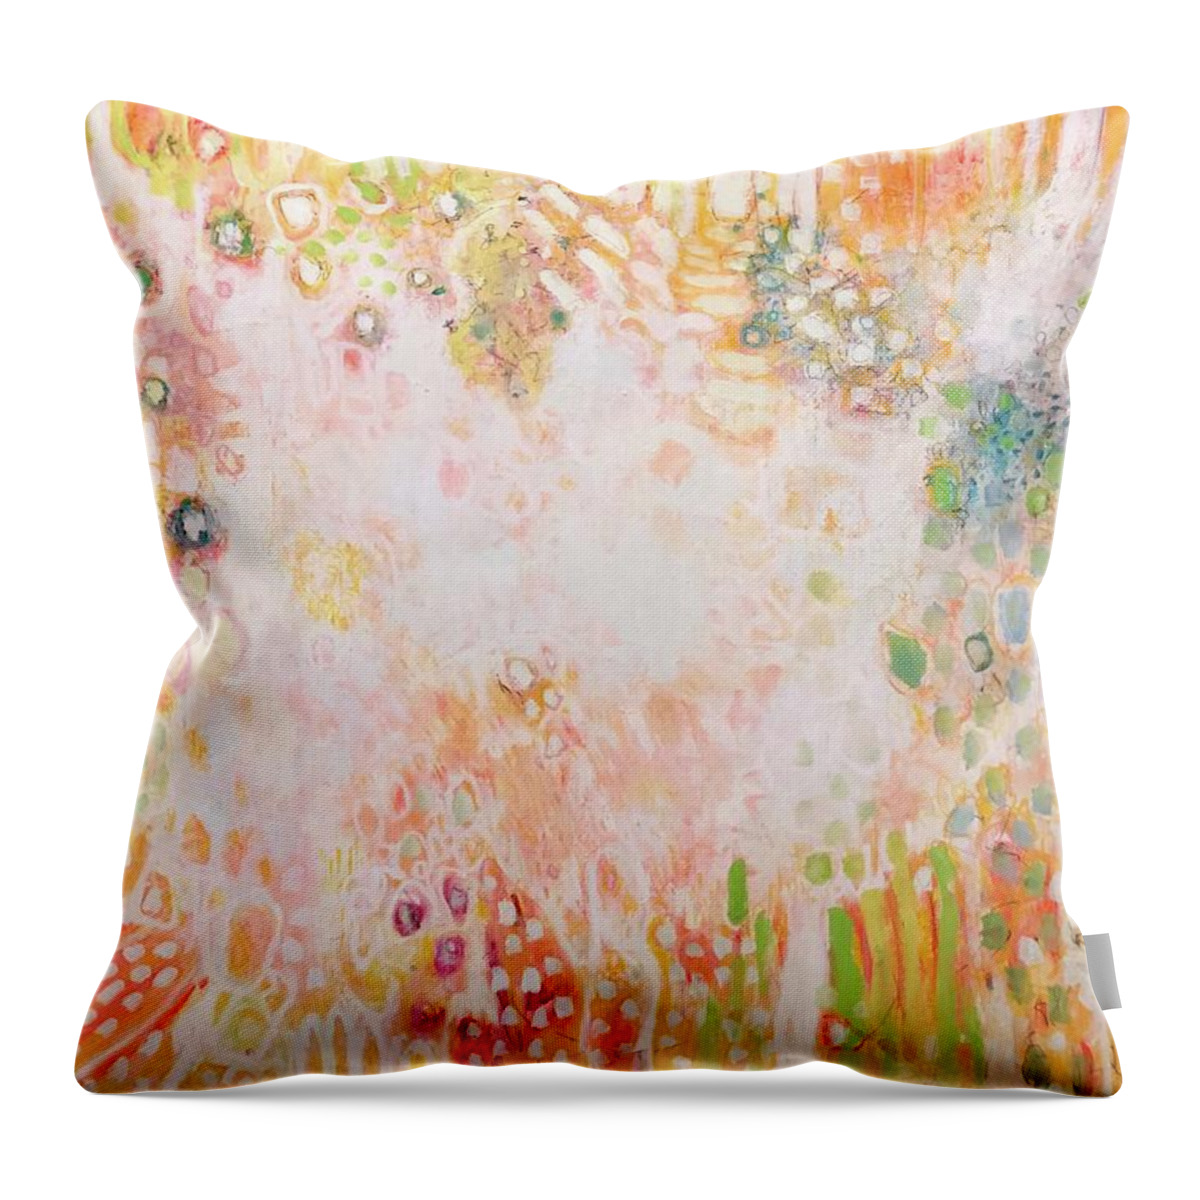 Pray Throw Pillow featuring the painting Prayers Going Up Painting Number 5 by Laurie Maves ART